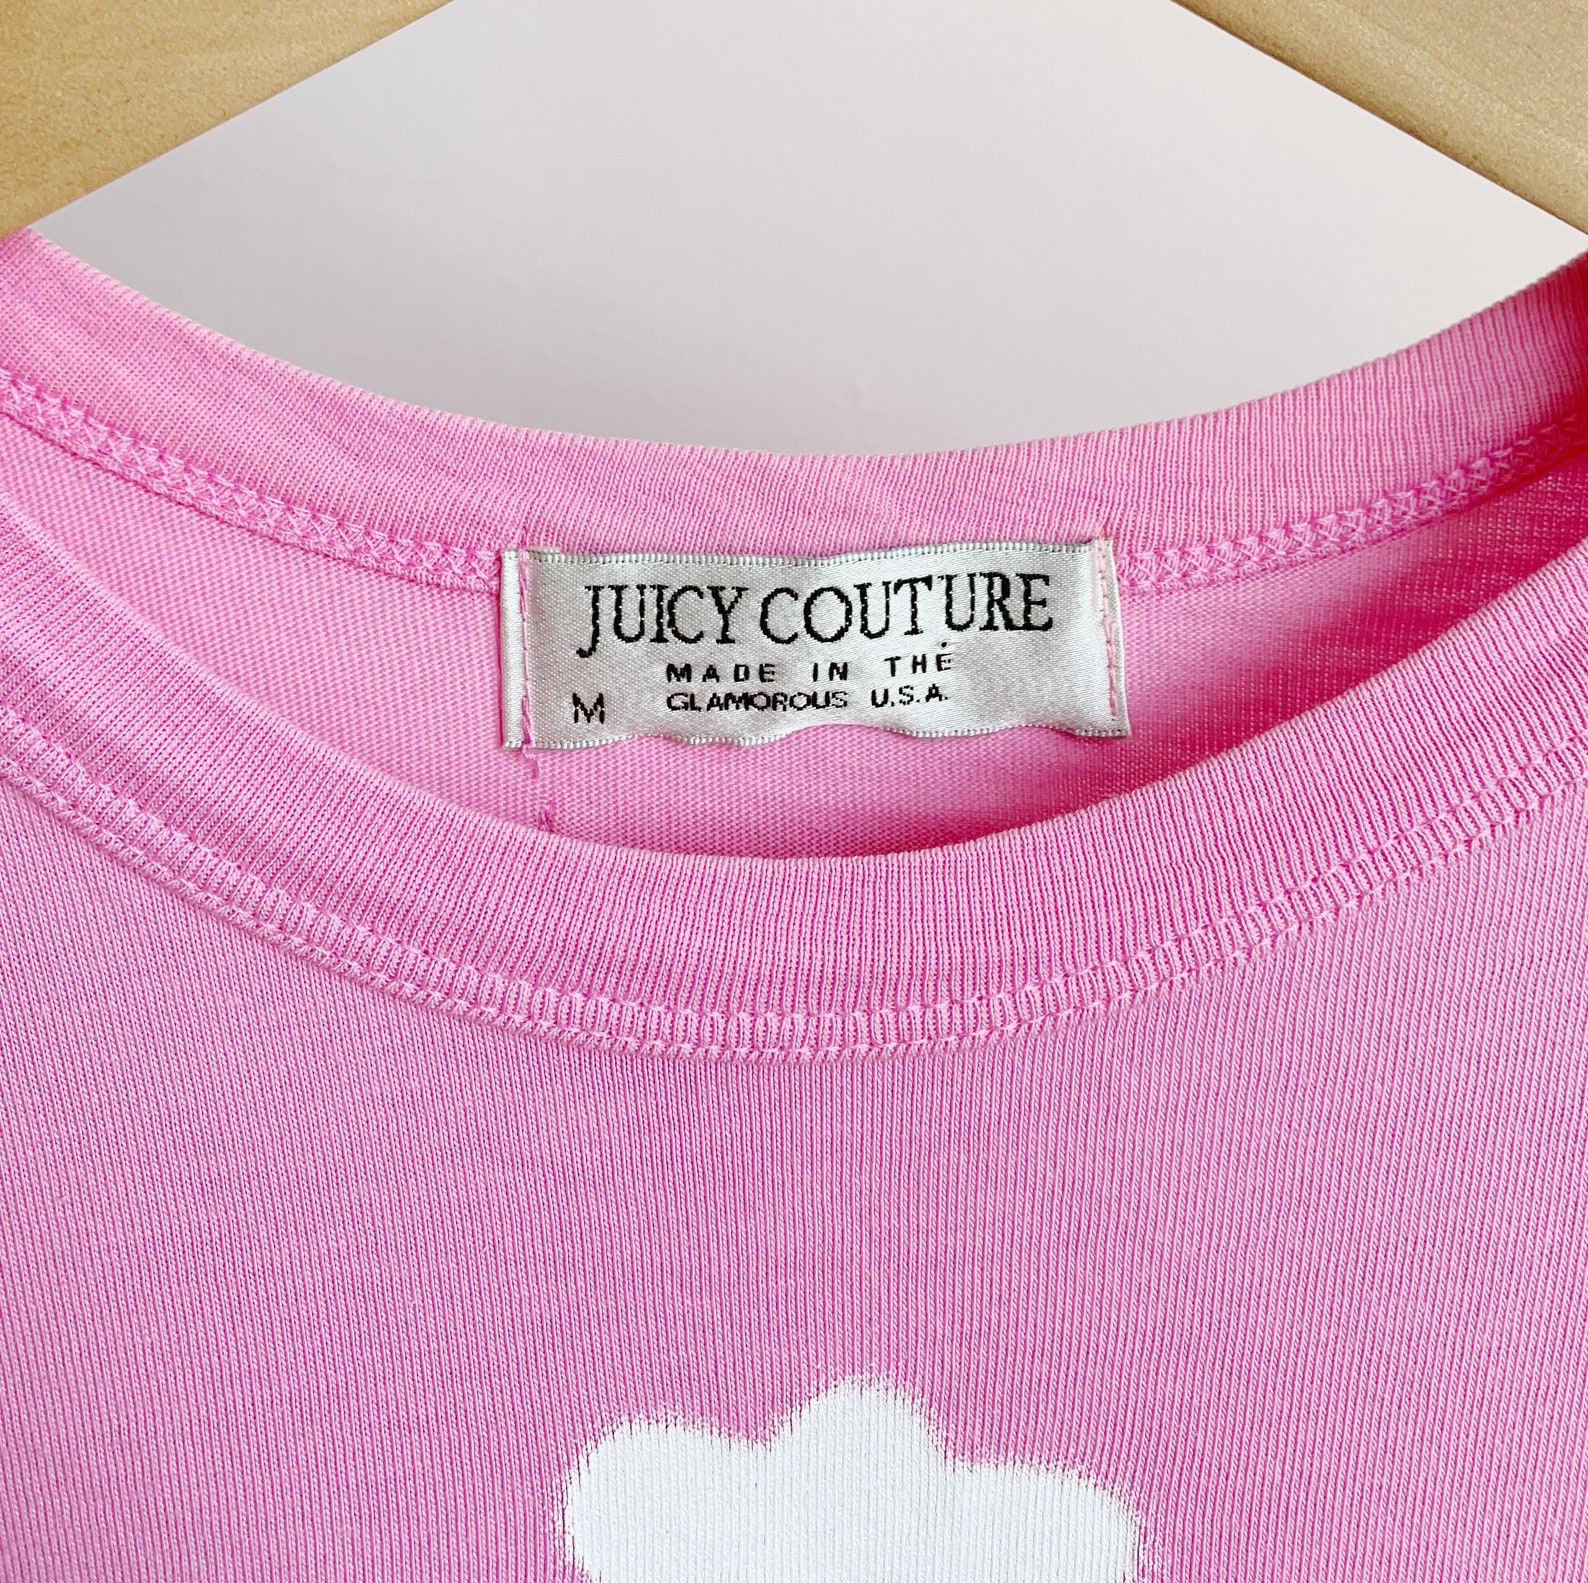 Original tag juicy couture 'i want candy' graphic | Etsy